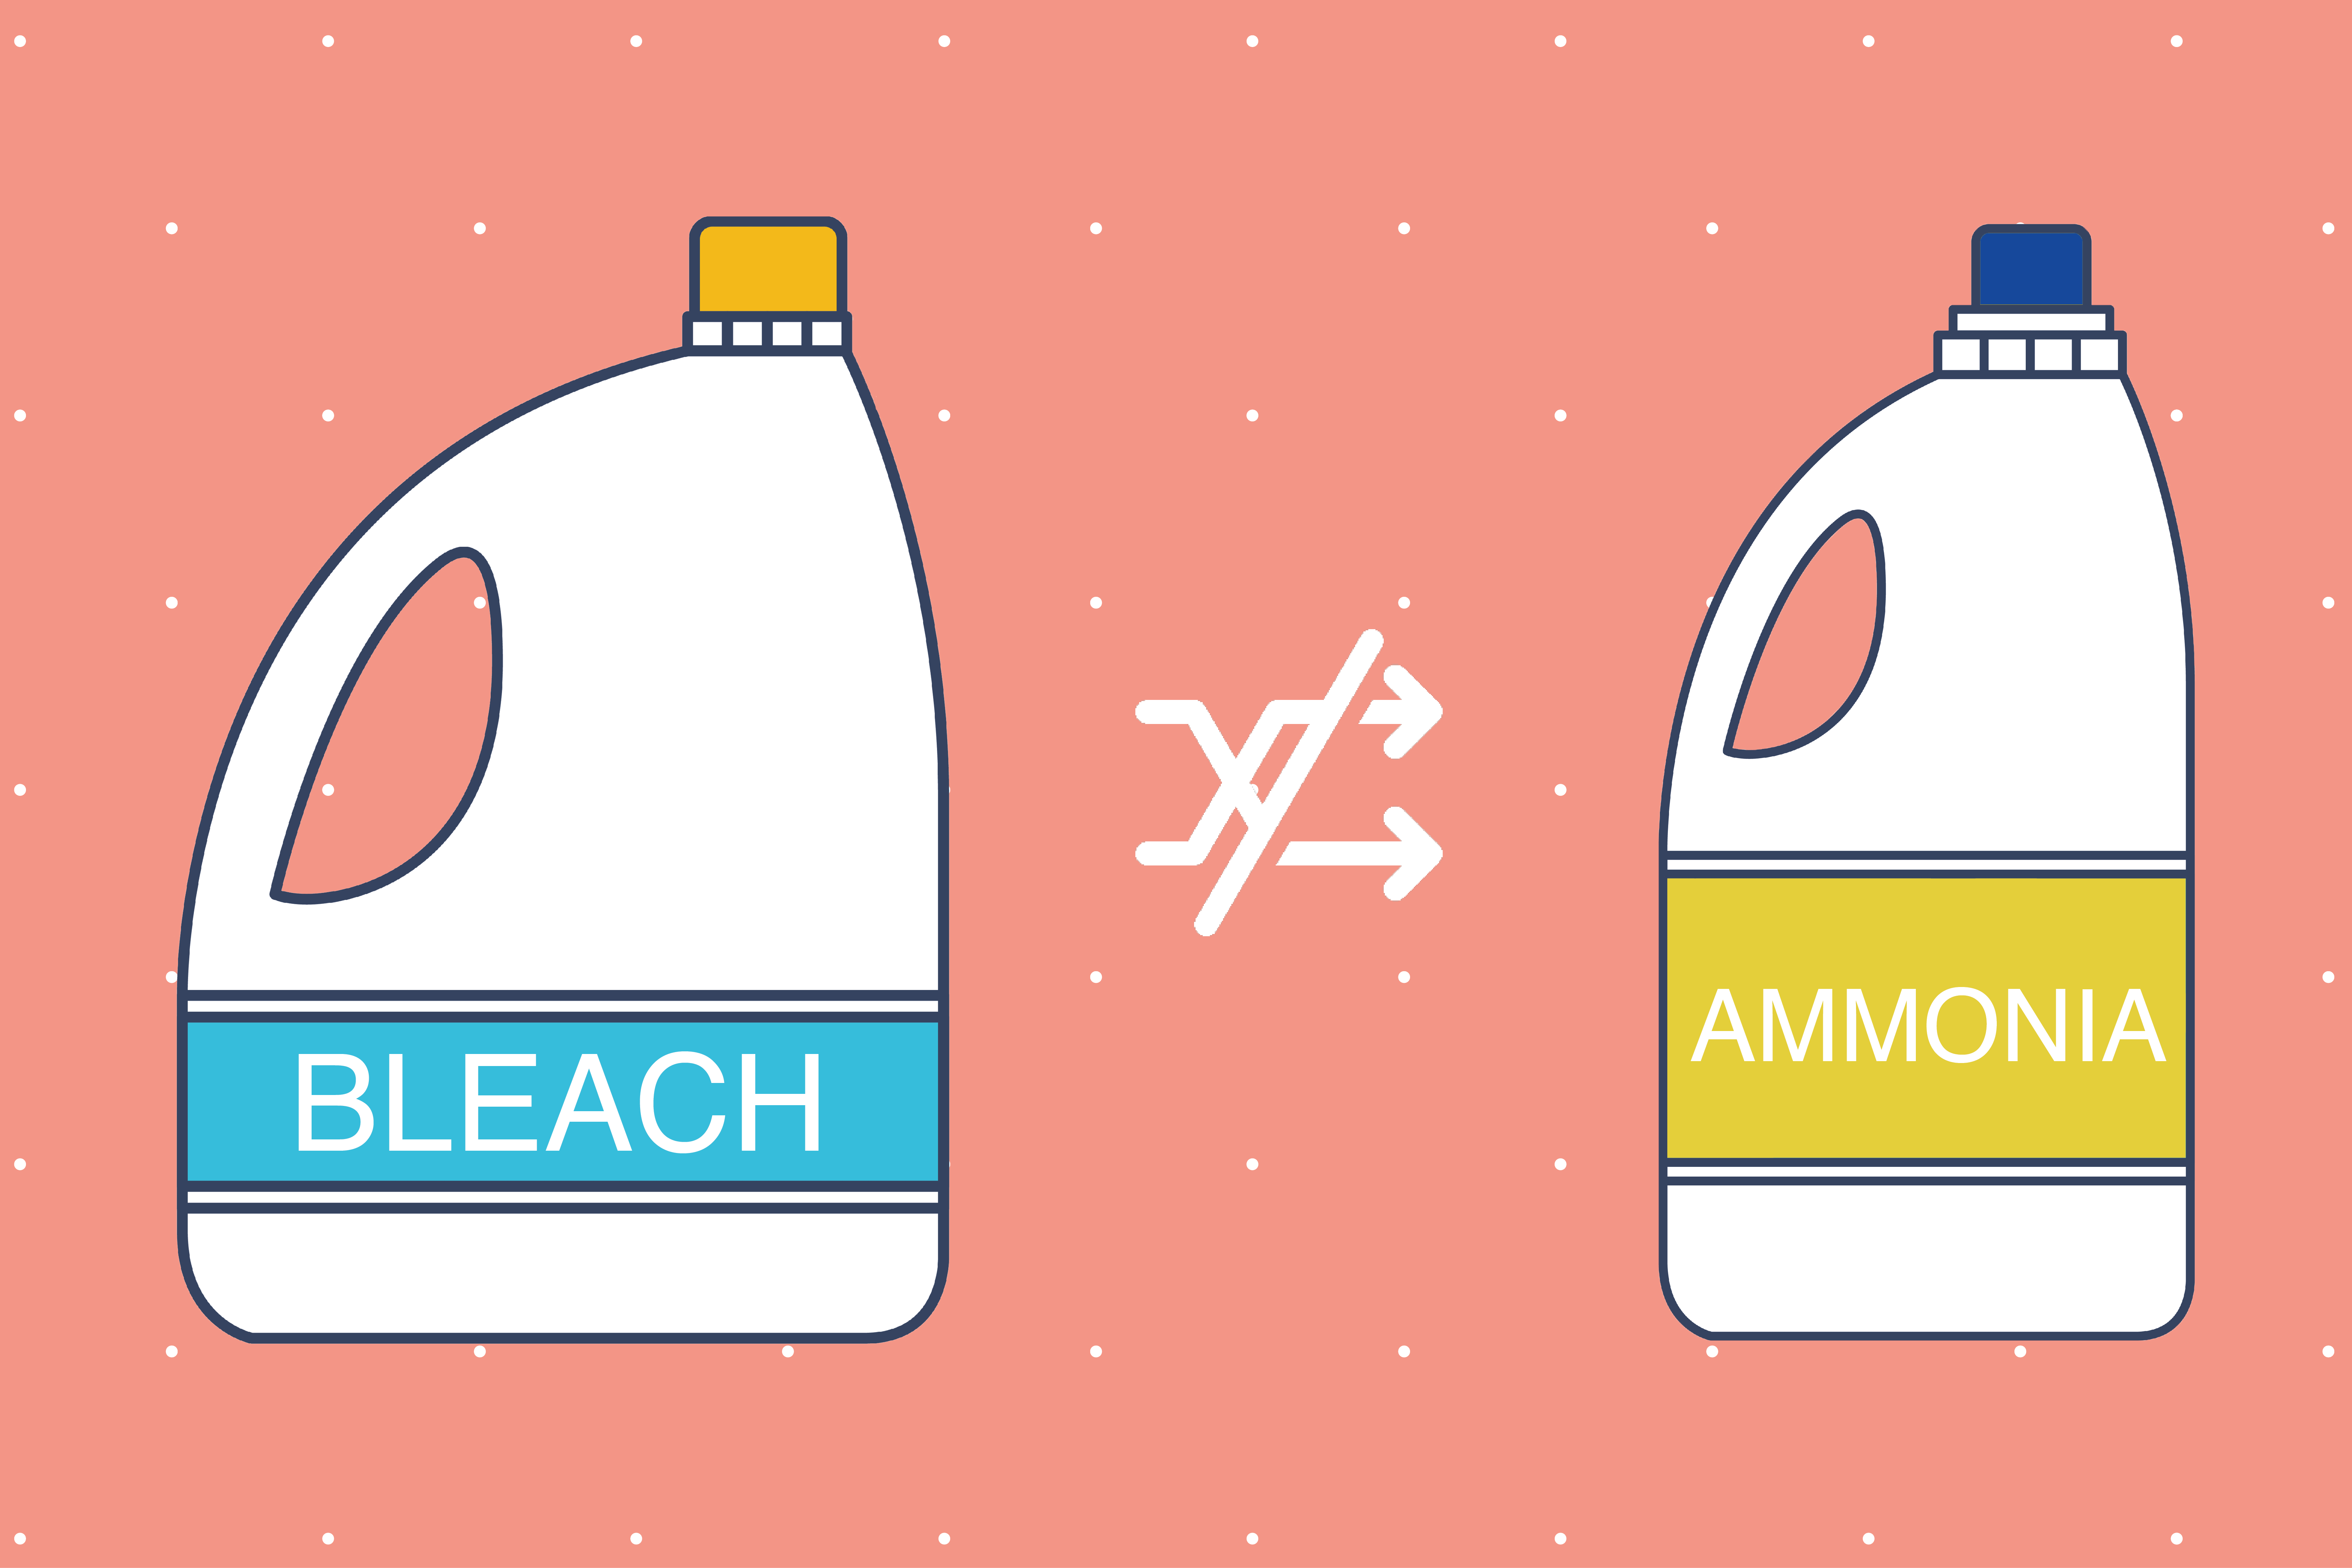 20 Household Cleaning Products You Should Never Mix